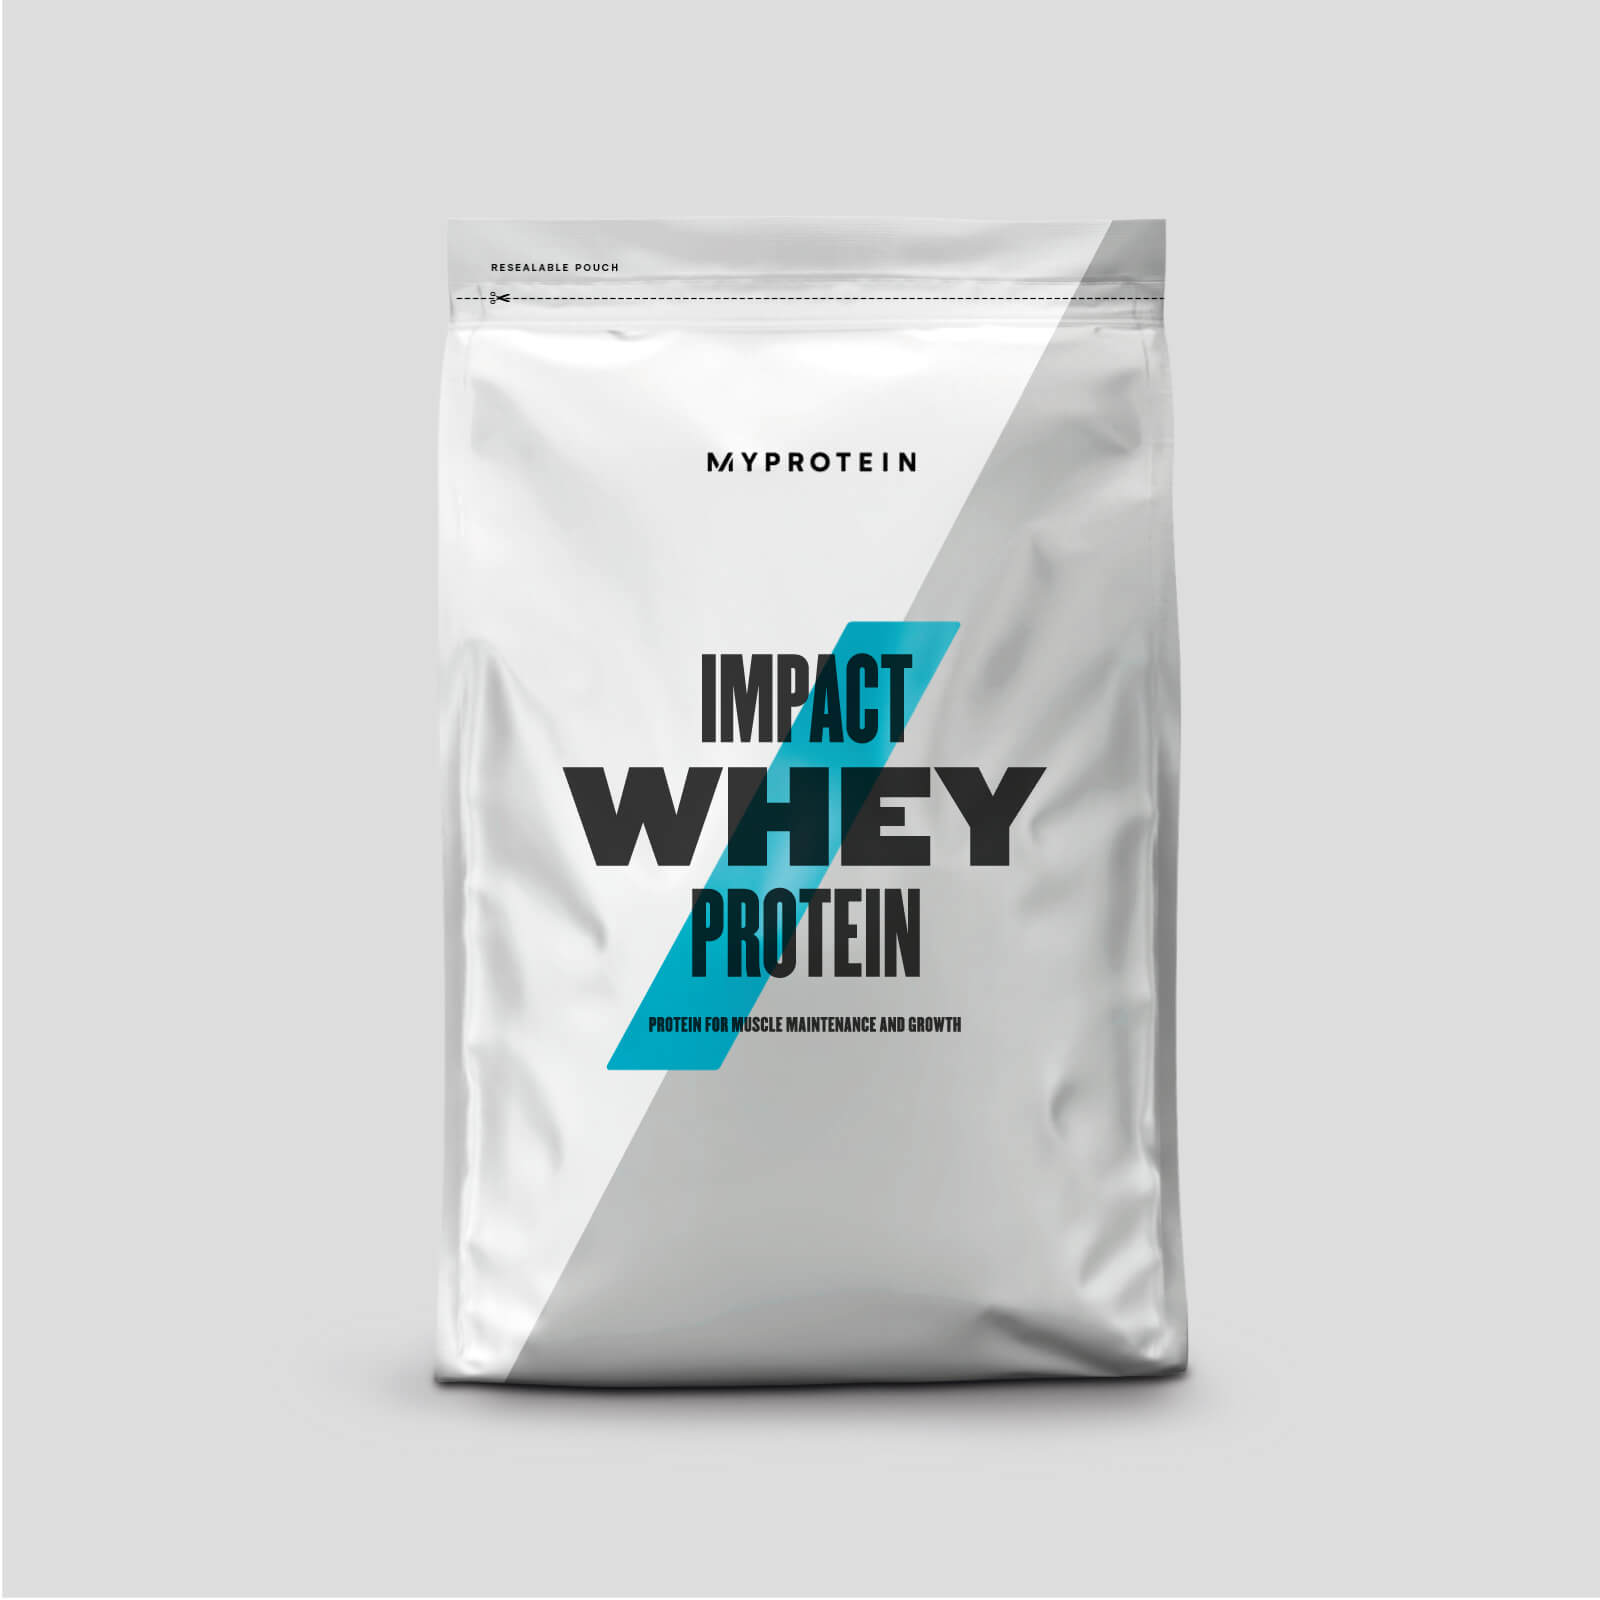 Myprotein Impact Whey Protein - 1kg - Sticky Toffee Pudding